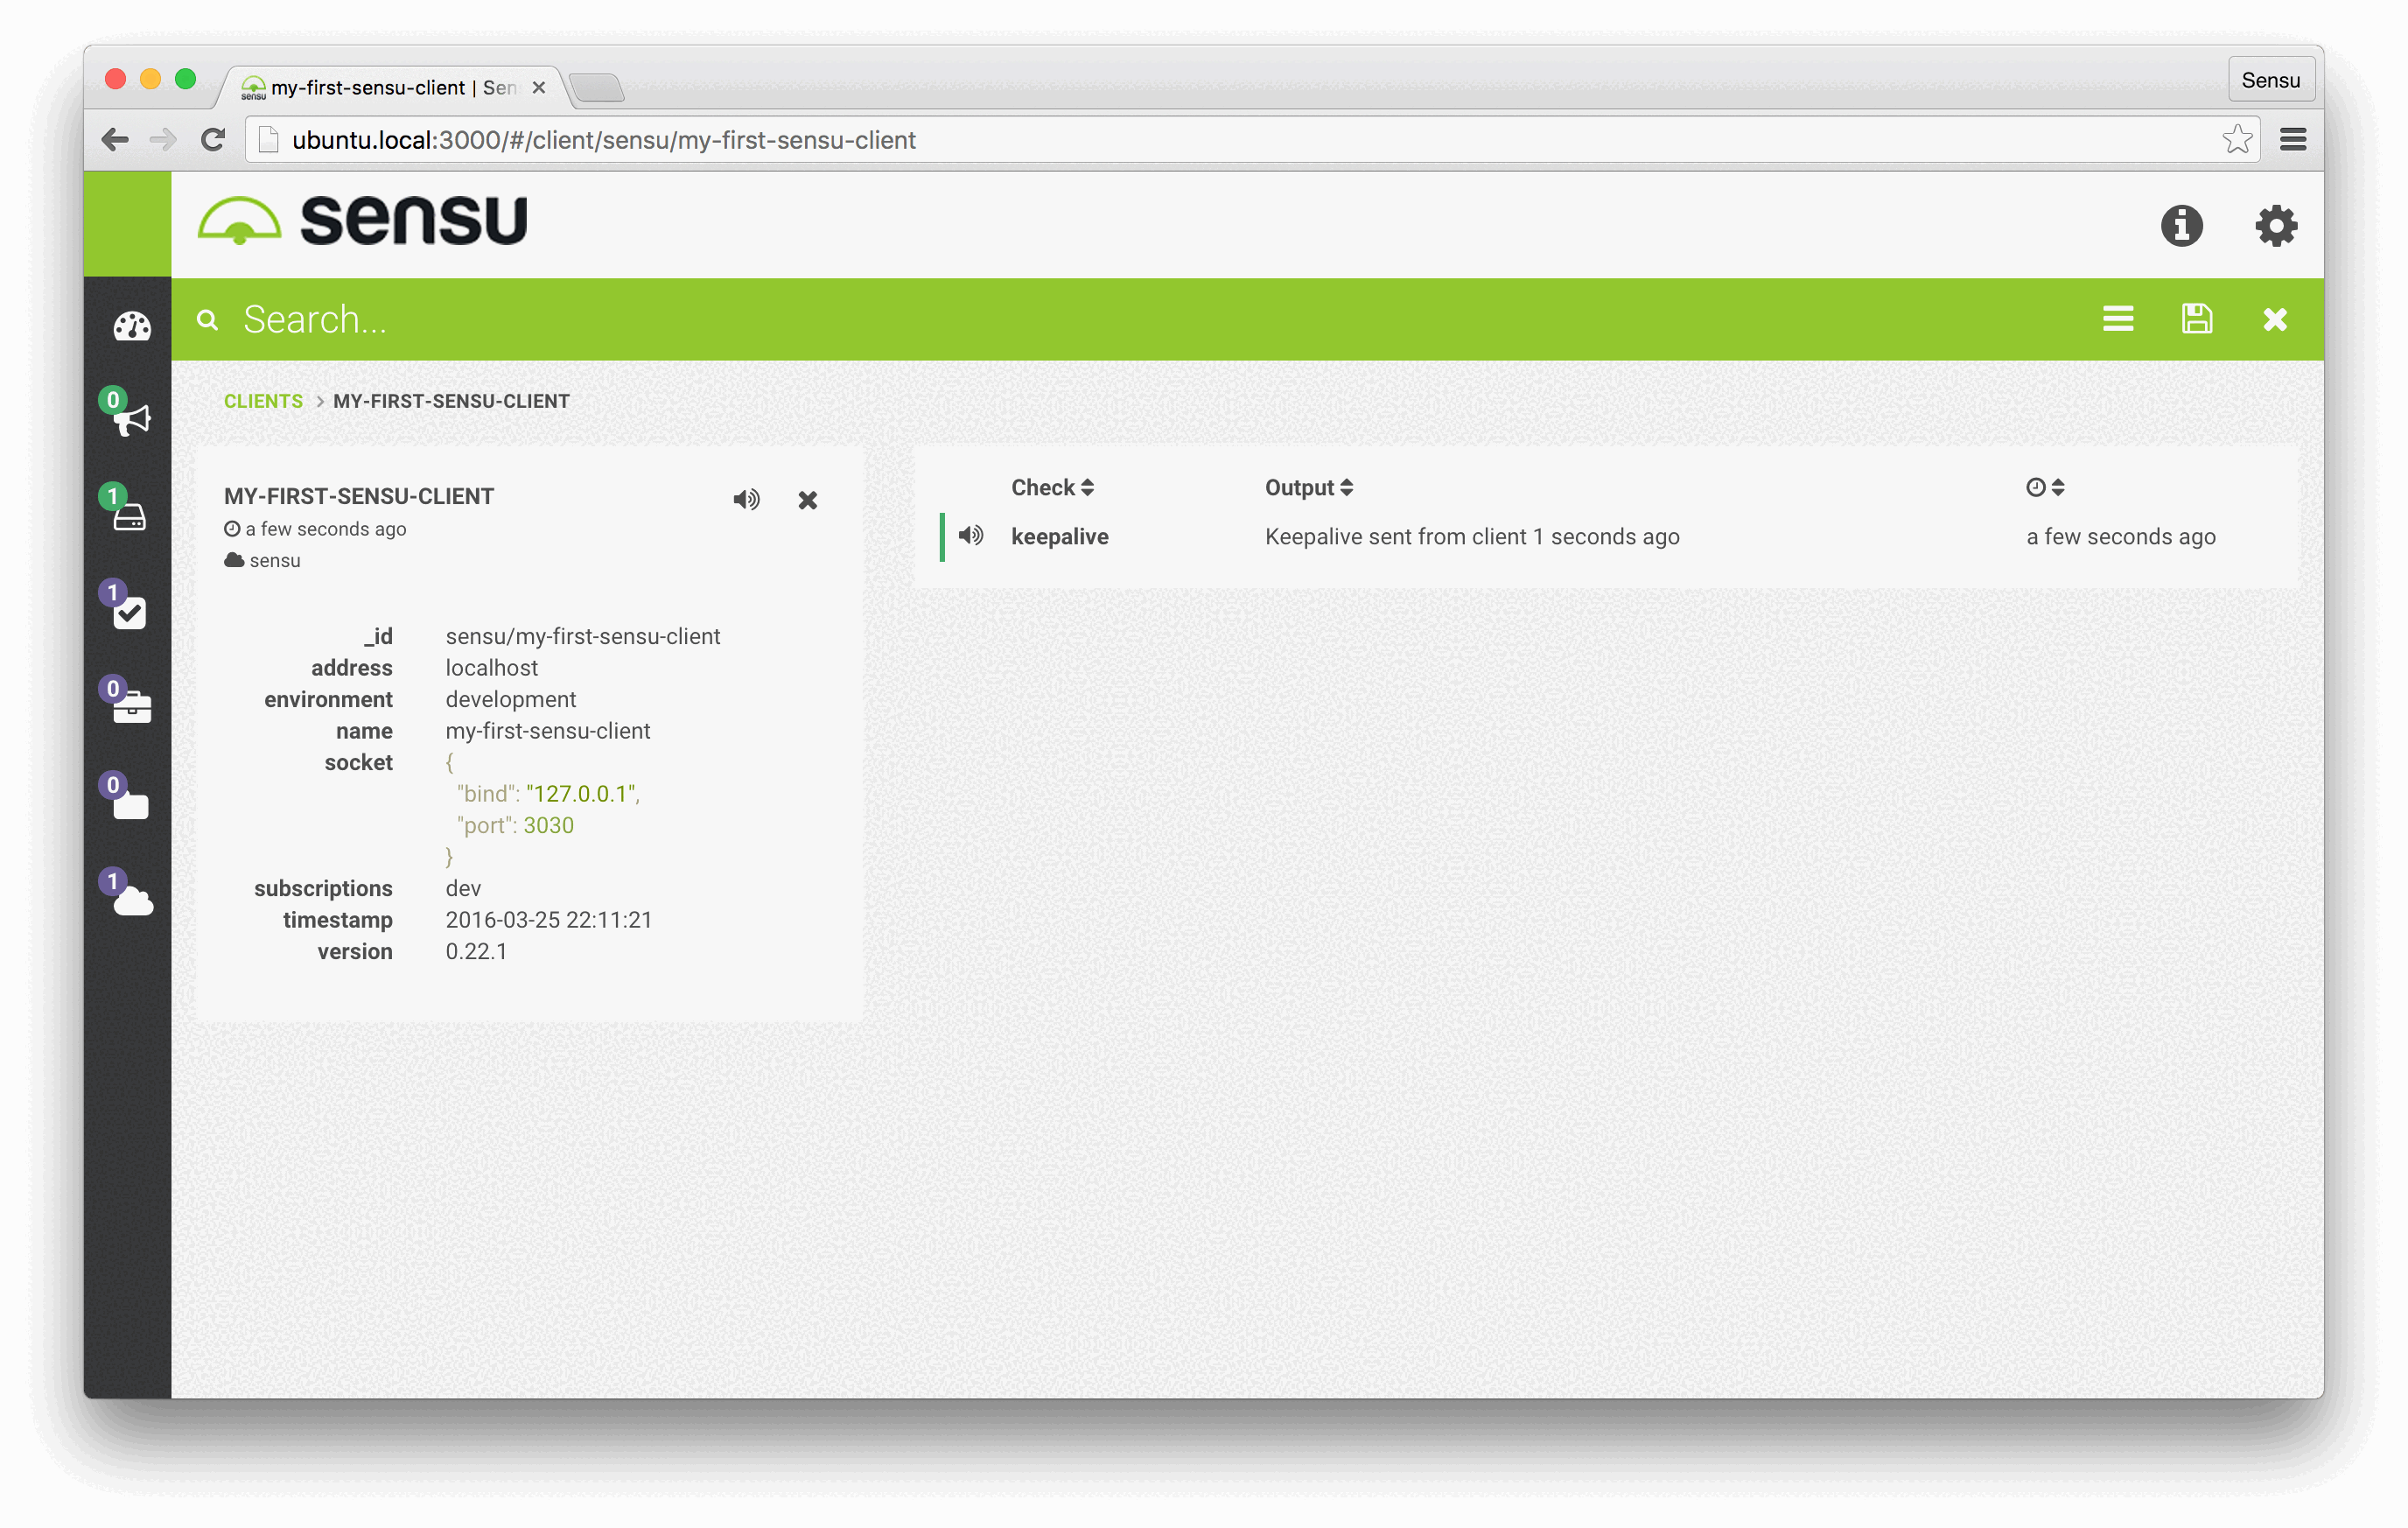 Detail page for first Sensu client in Enterprise Dashboard